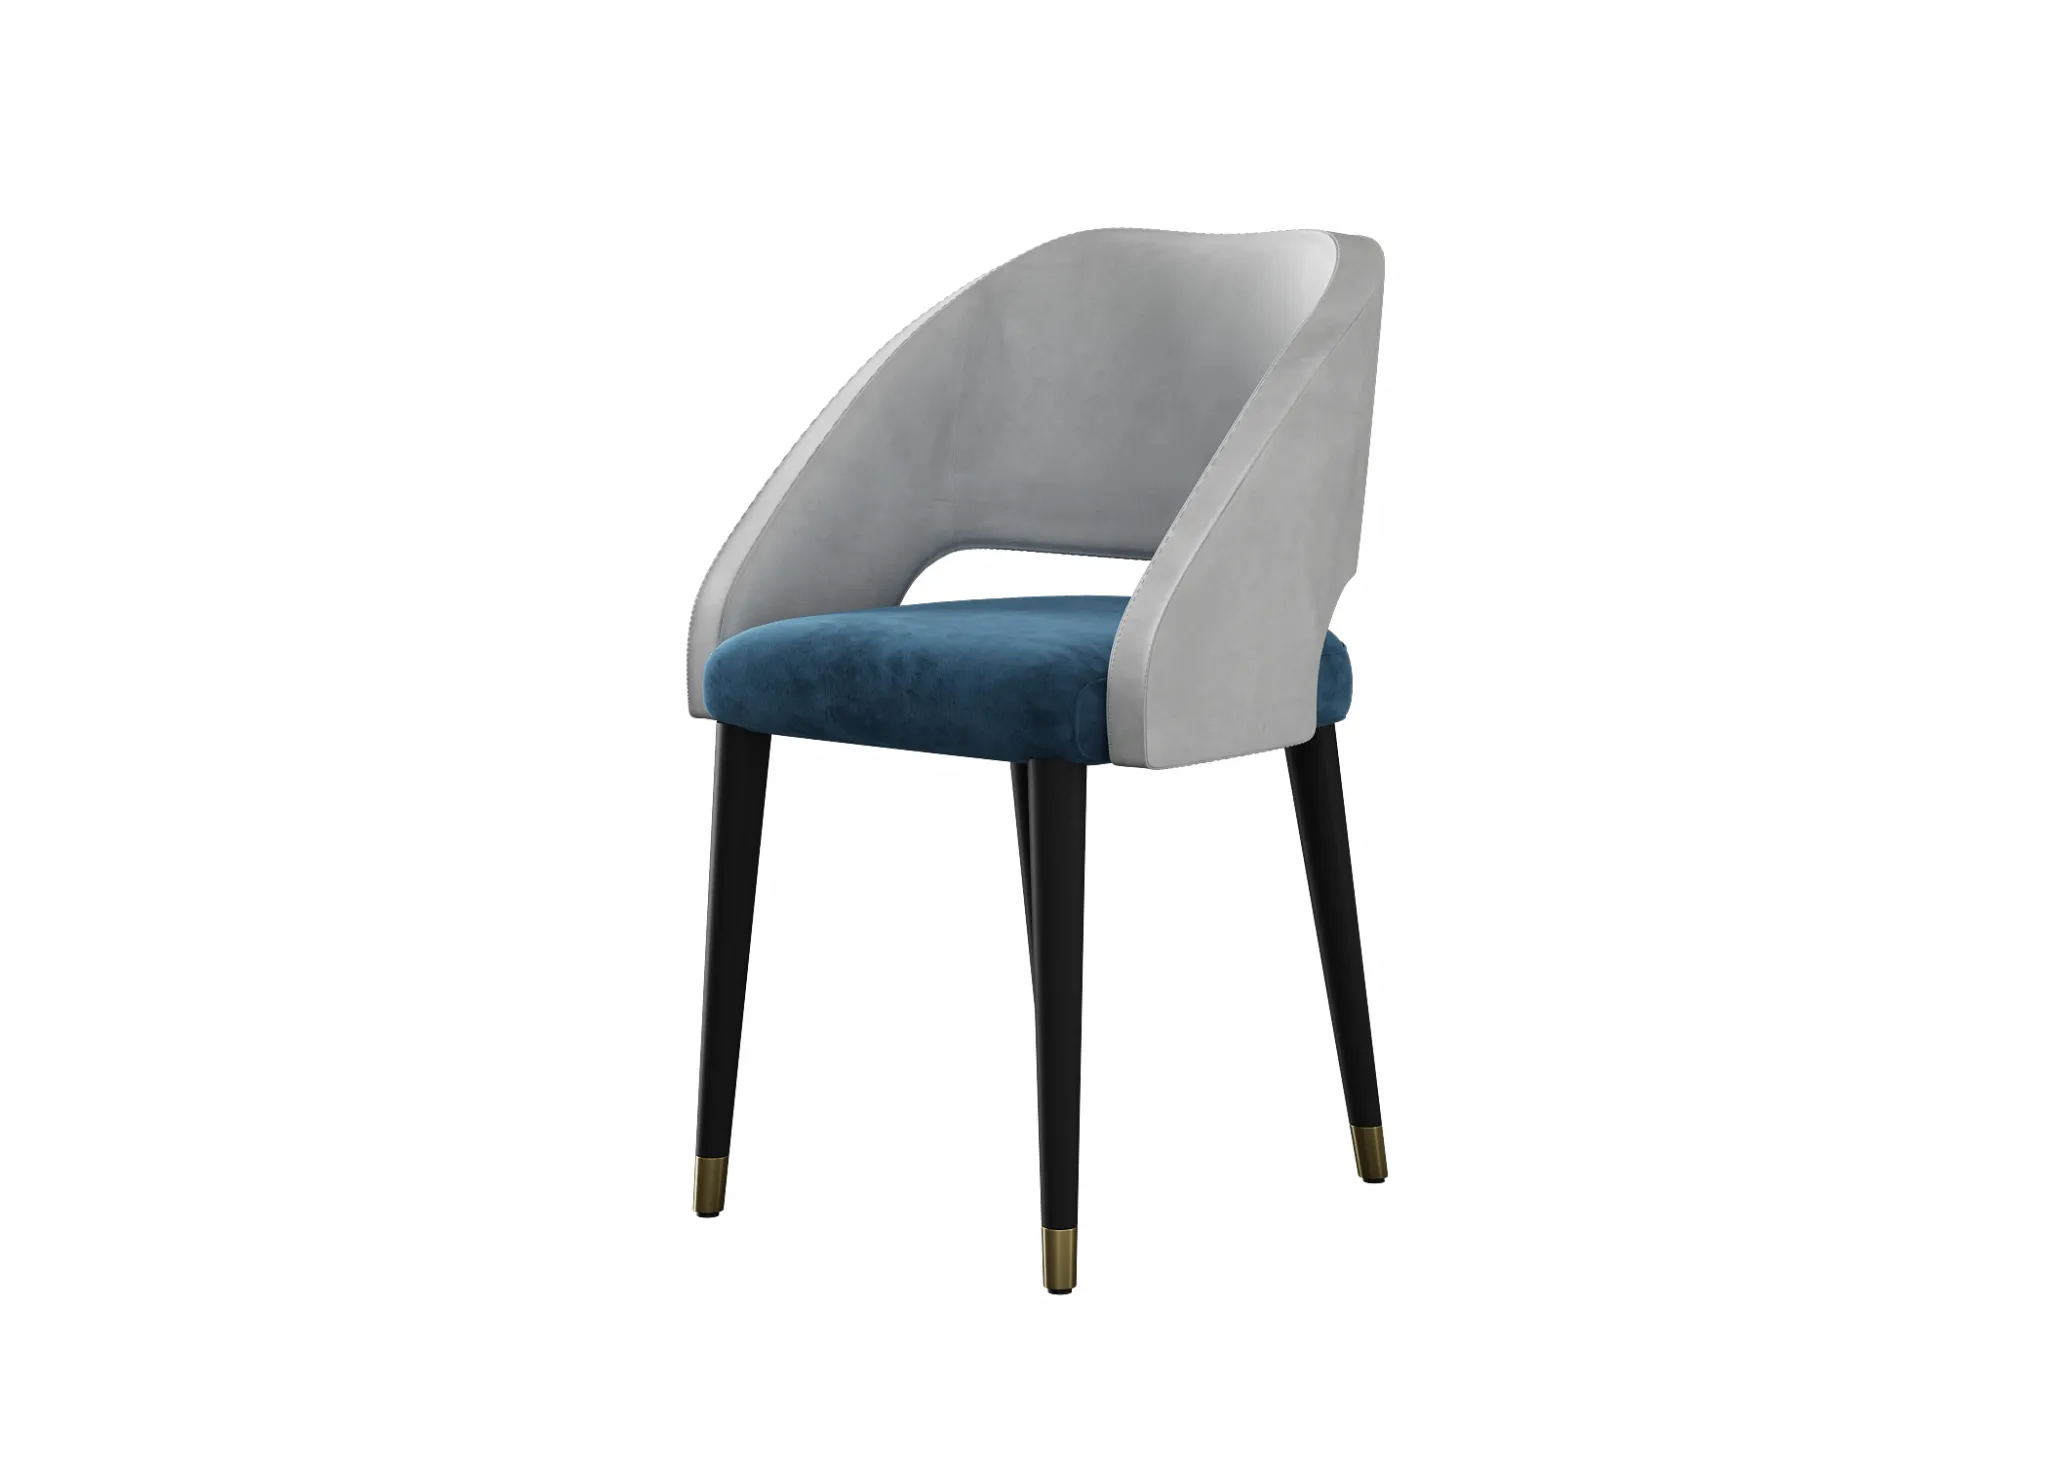 FURNITURE 3D MODELS – CHAIRS – 0495